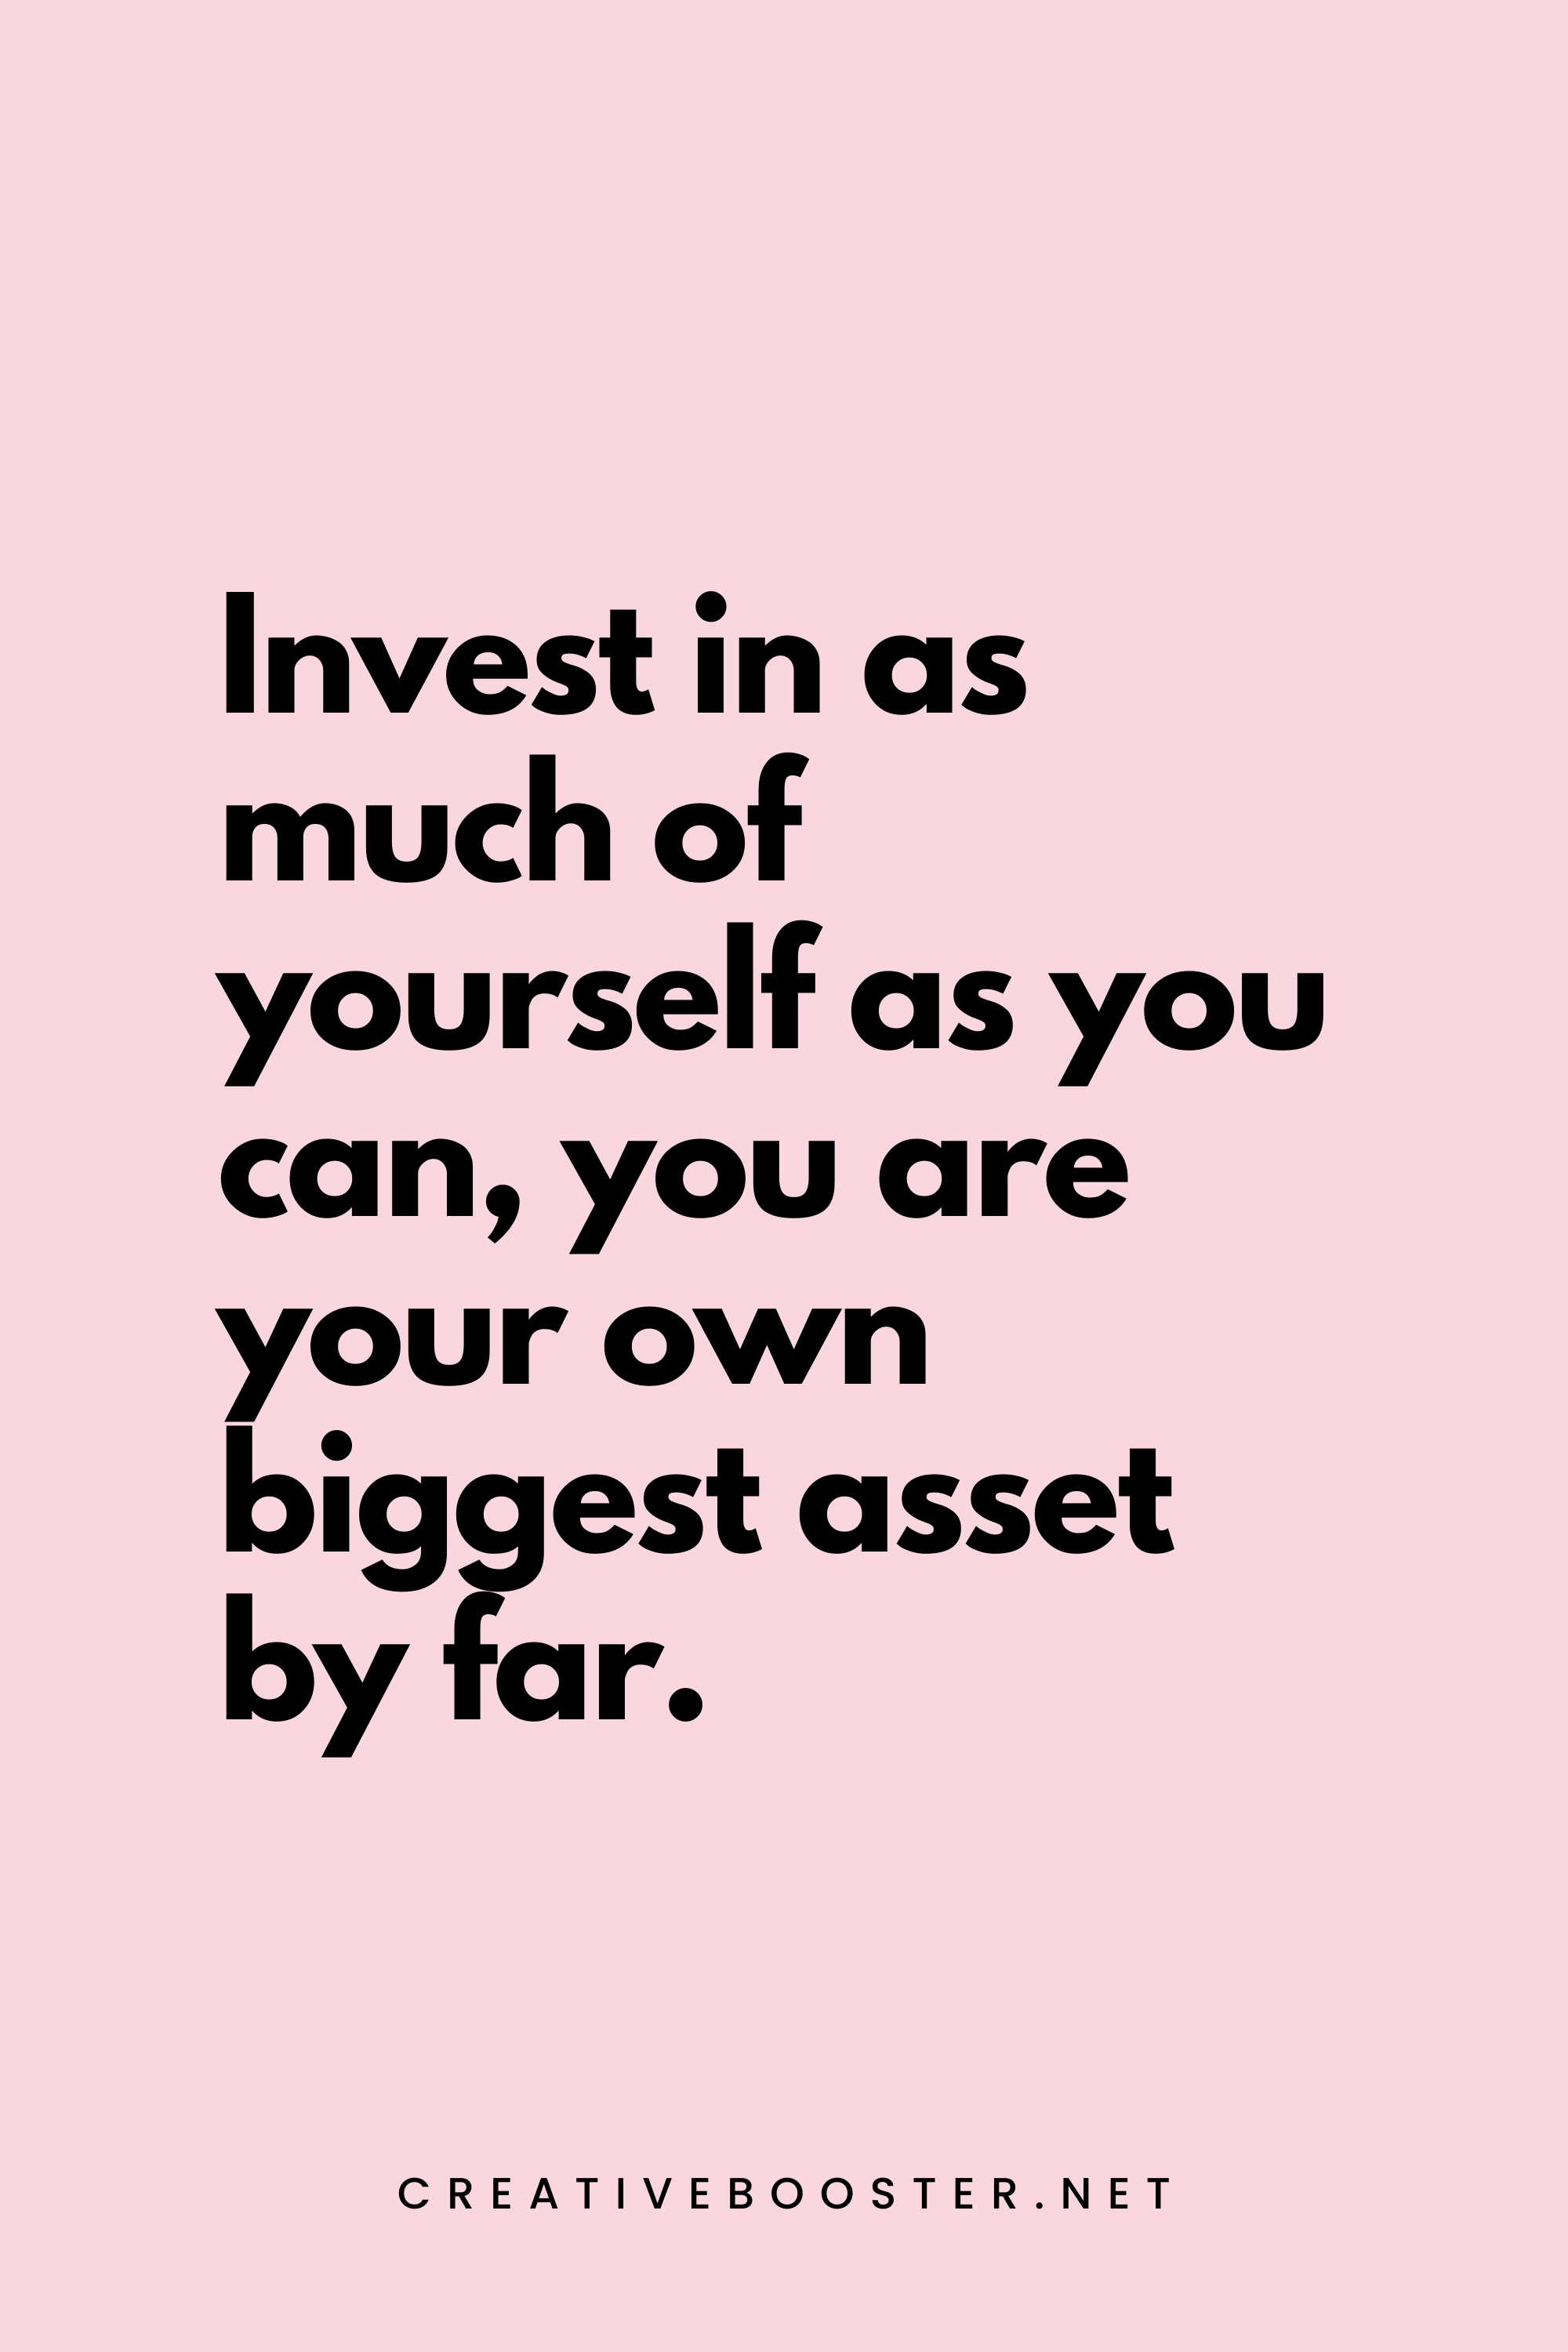 15. Invest in as much of yourself as you can, you are your own biggest asset by far. - Warren Buffett - 1. Popular Financial Freedom Quotes